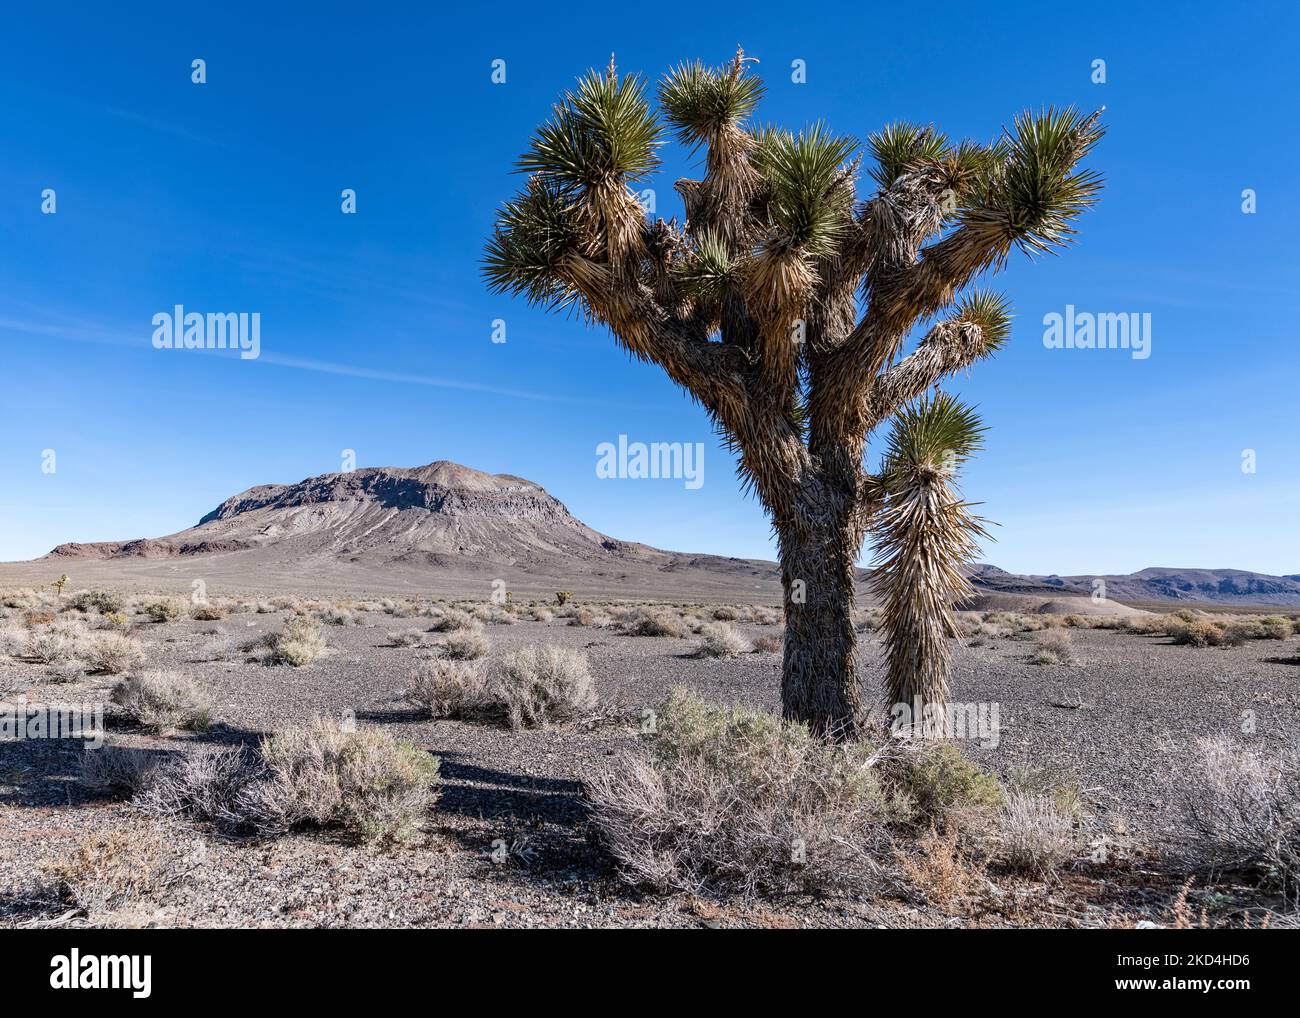 Joshua Tree close-up in foreground with desert expanse and rocky mountain in background. Stock Photo